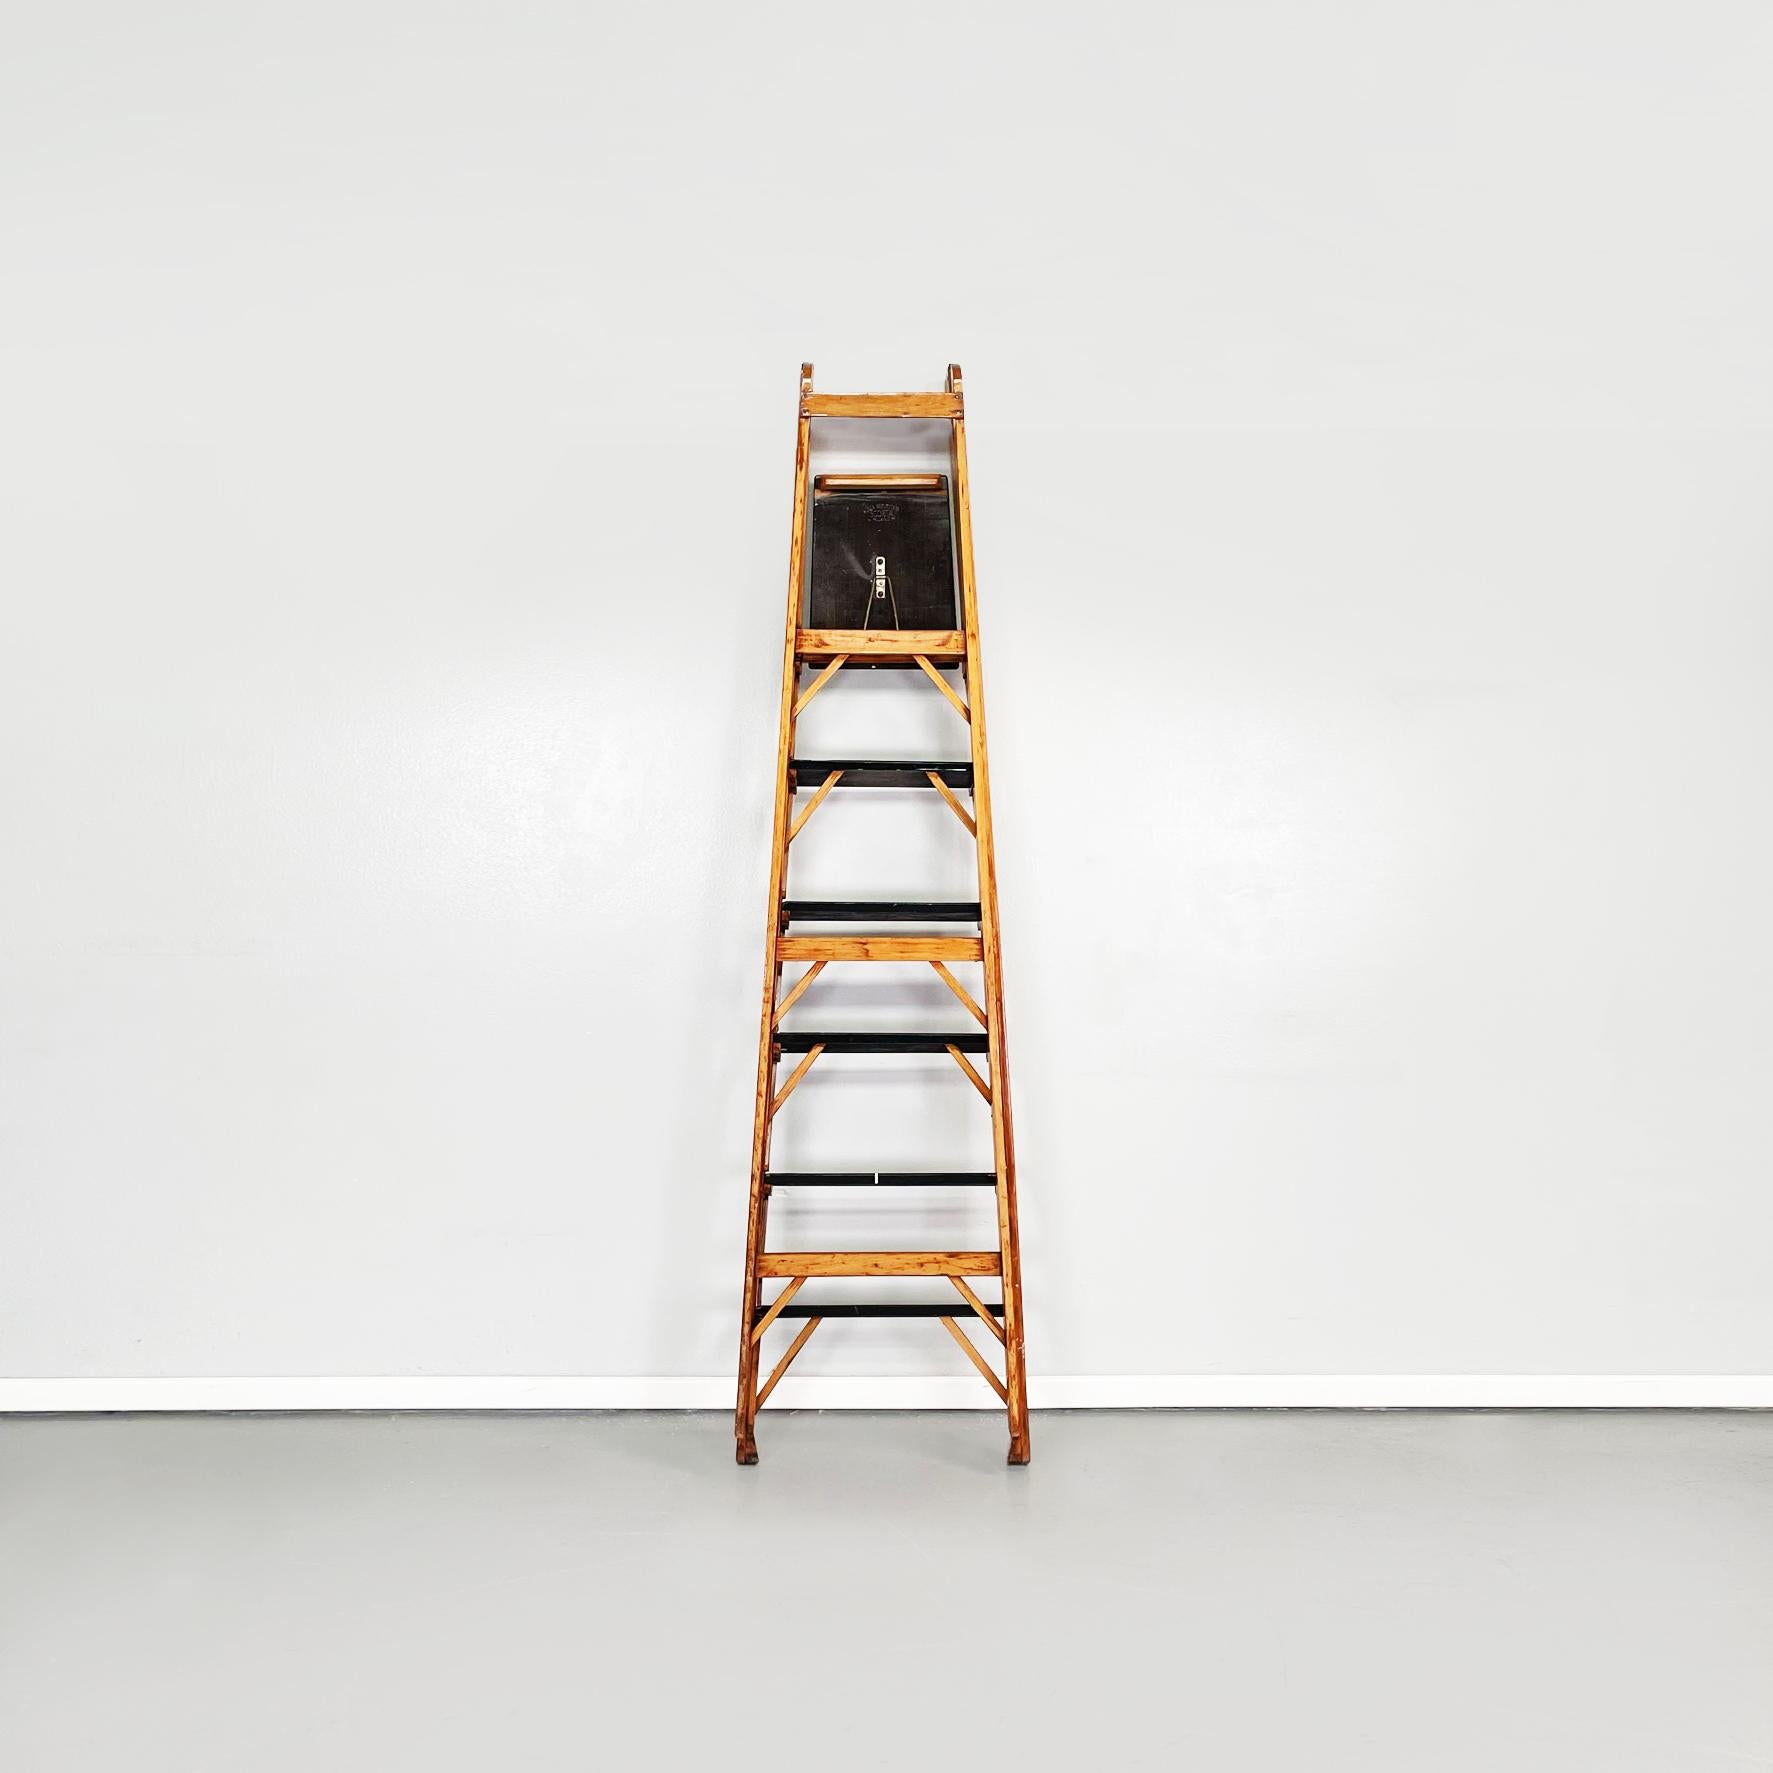 Mid-20th Century Italian Mid-Century Modern Polished Wooden Step Ladder Stair by Scorta, 1950s